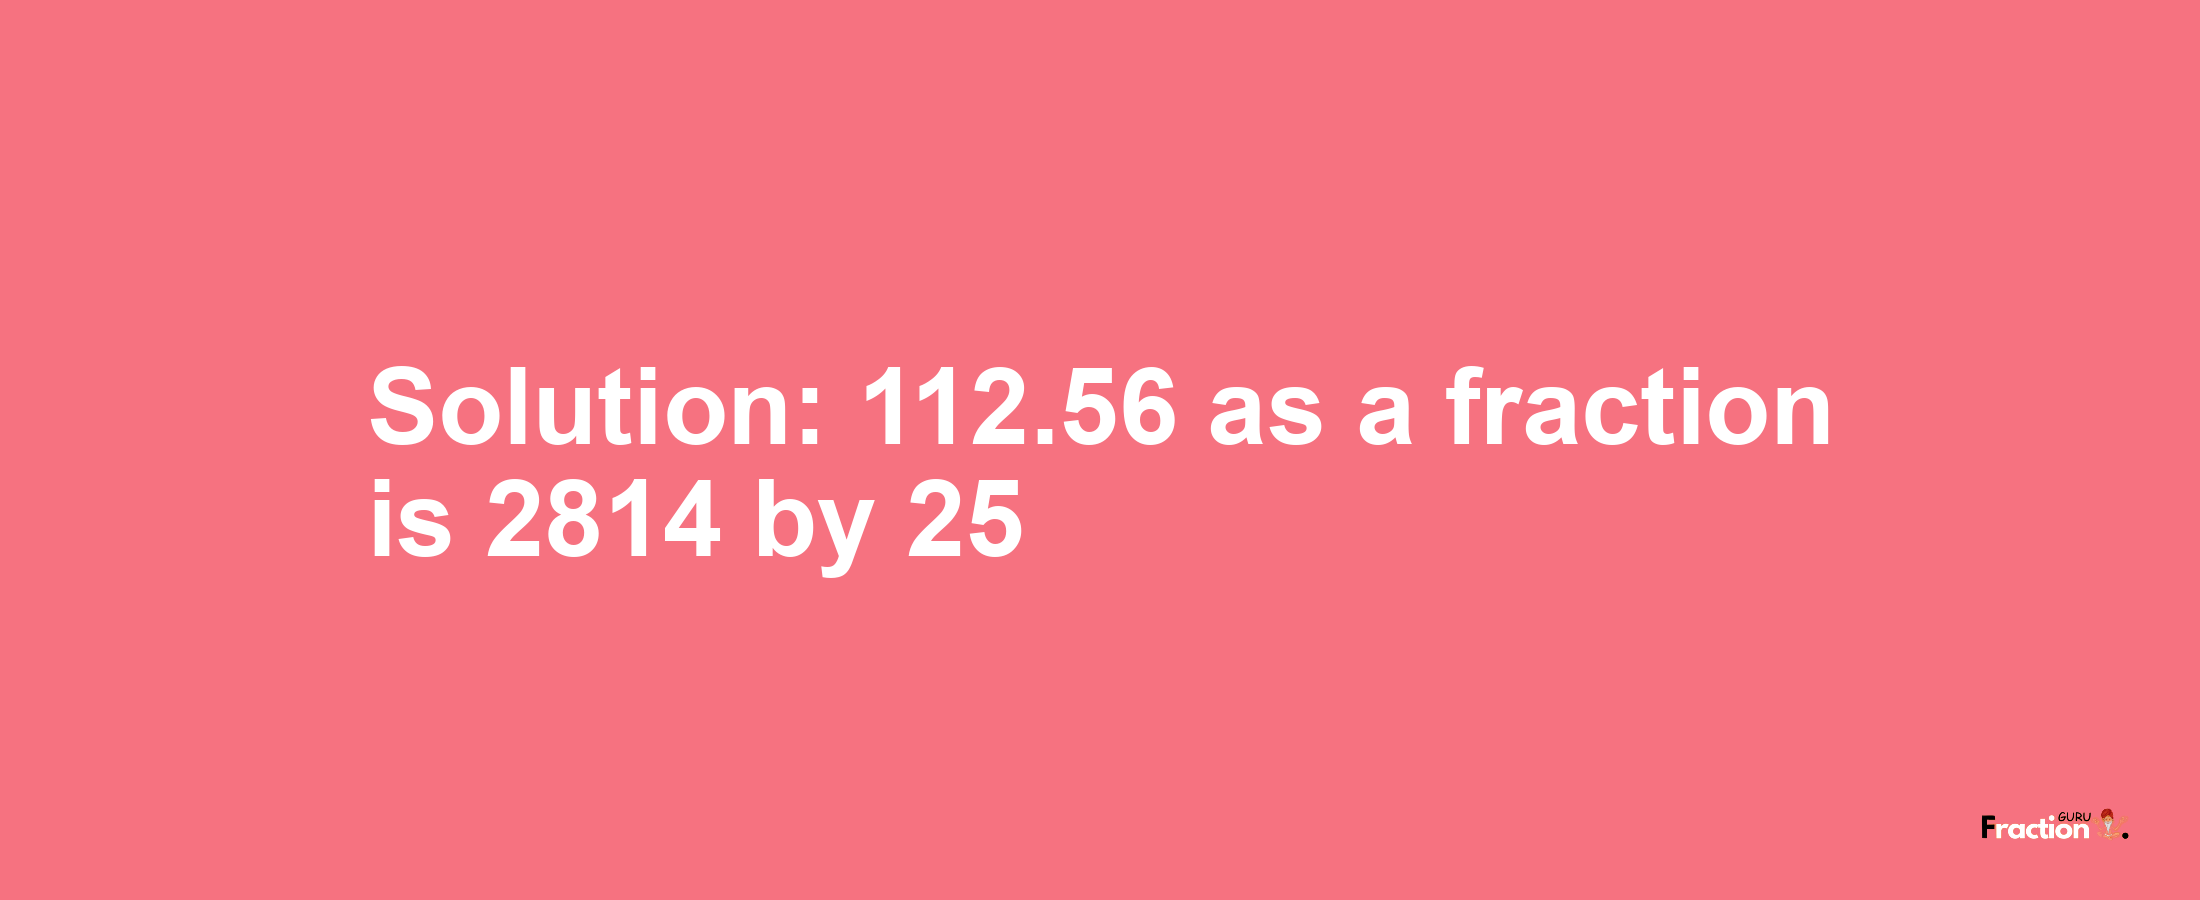 Solution:112.56 as a fraction is 2814/25